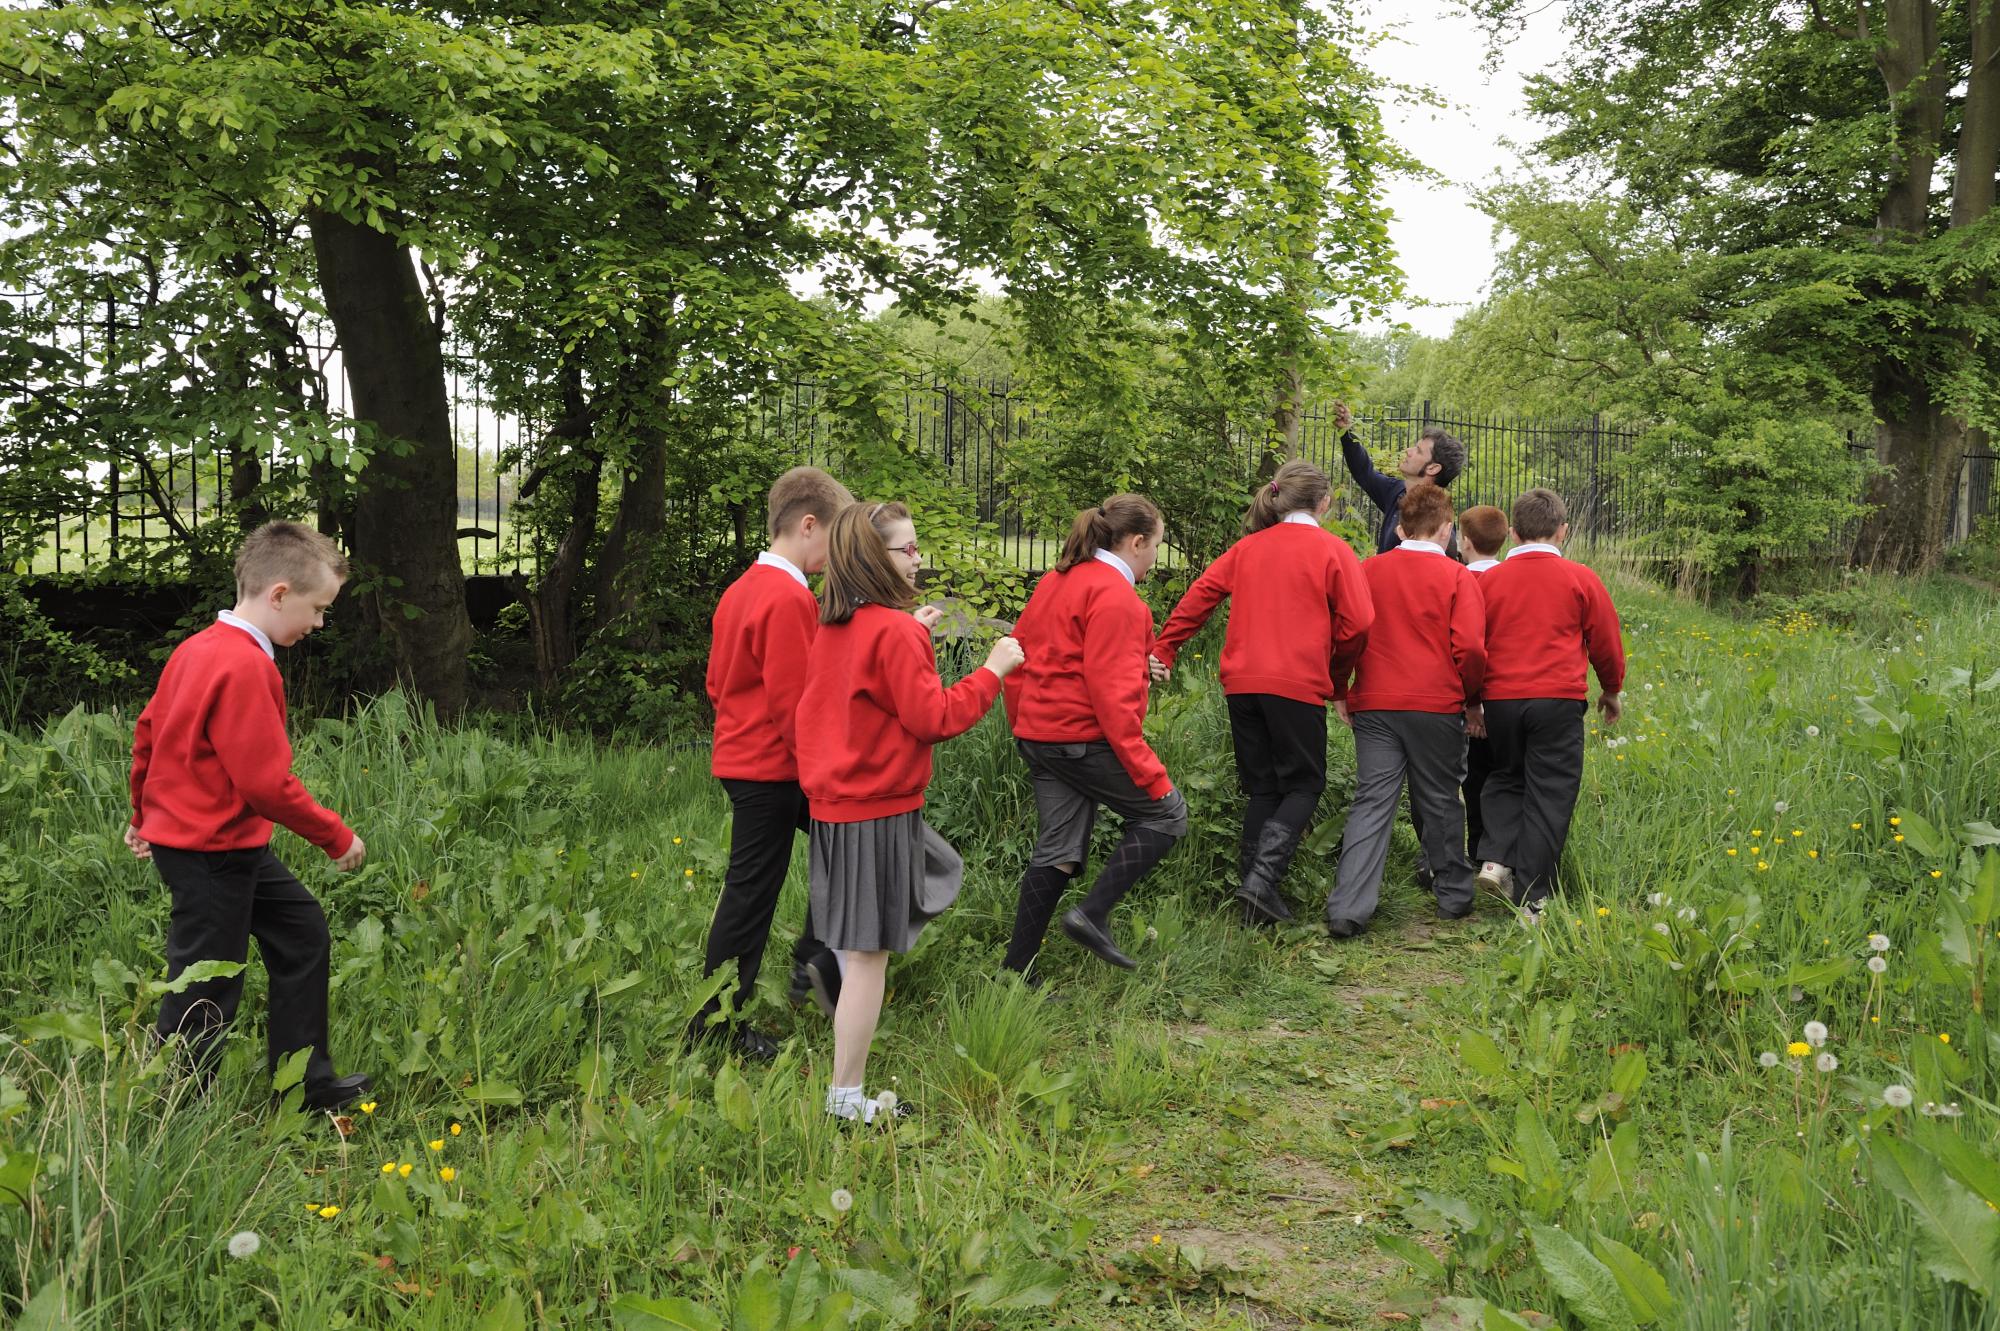 School children on a ranger led nature walk near Carmunnock cemetery, Glasgow as part of biodiversity week. ©Lorne Gill/SNH. For information on reproduction rights contact the Scottish Natural Heritage Image Library on Tel. 01738 444177 or www.nature.scot